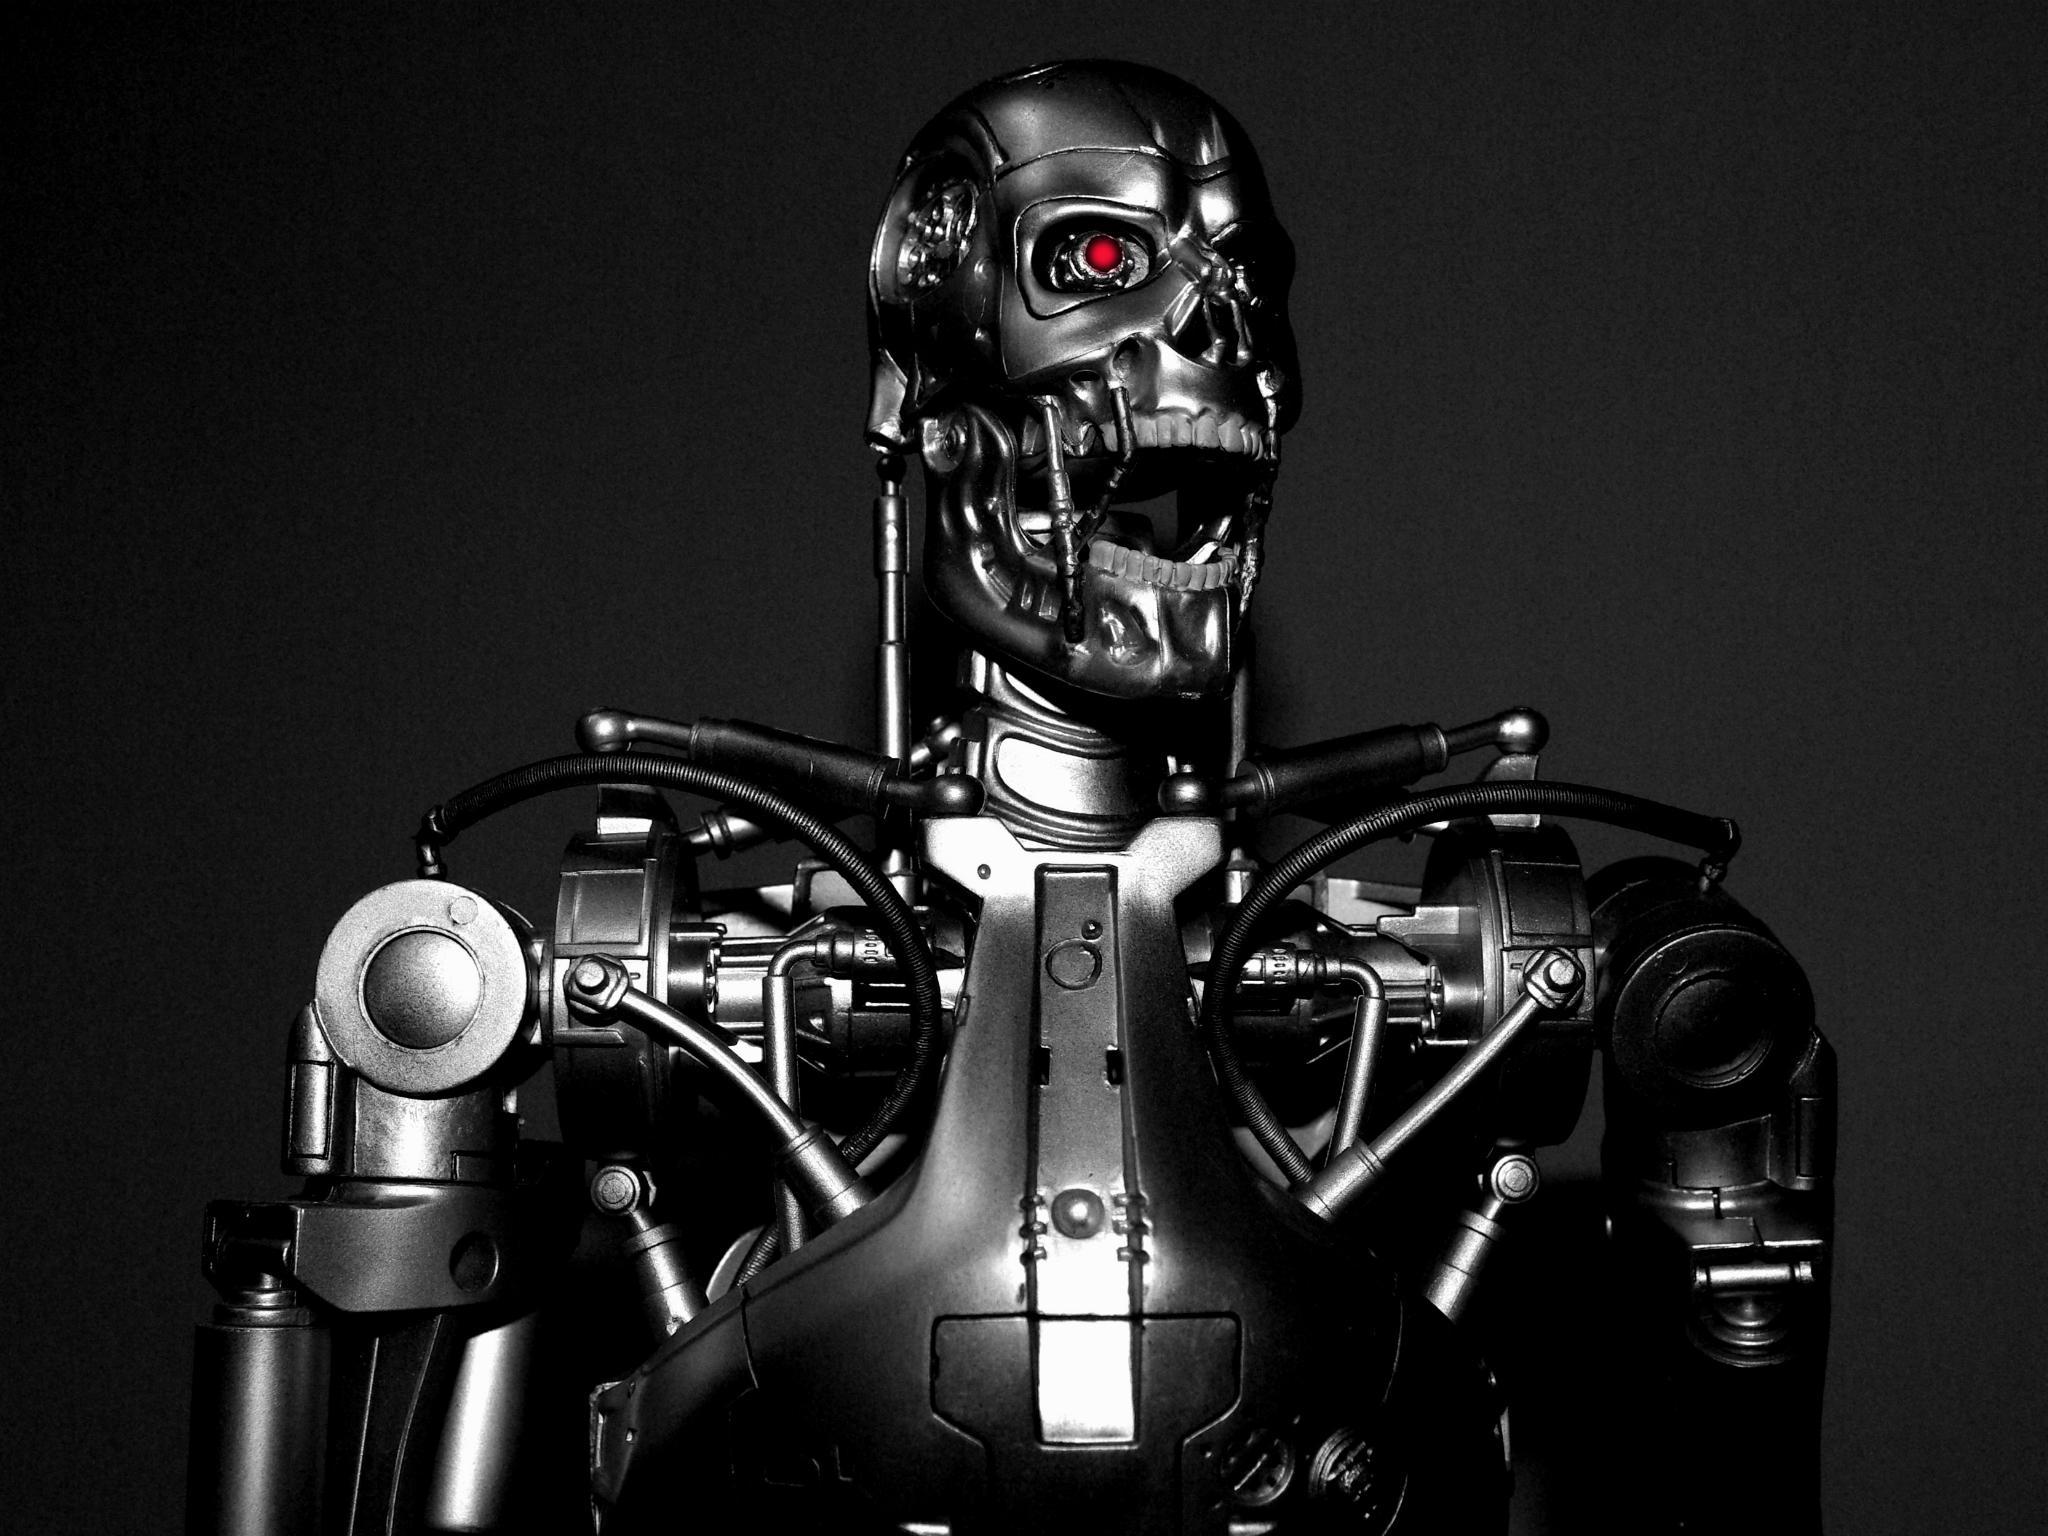 Artificial intelligence academics fear weaponized robots pose an existential threat to humanity.